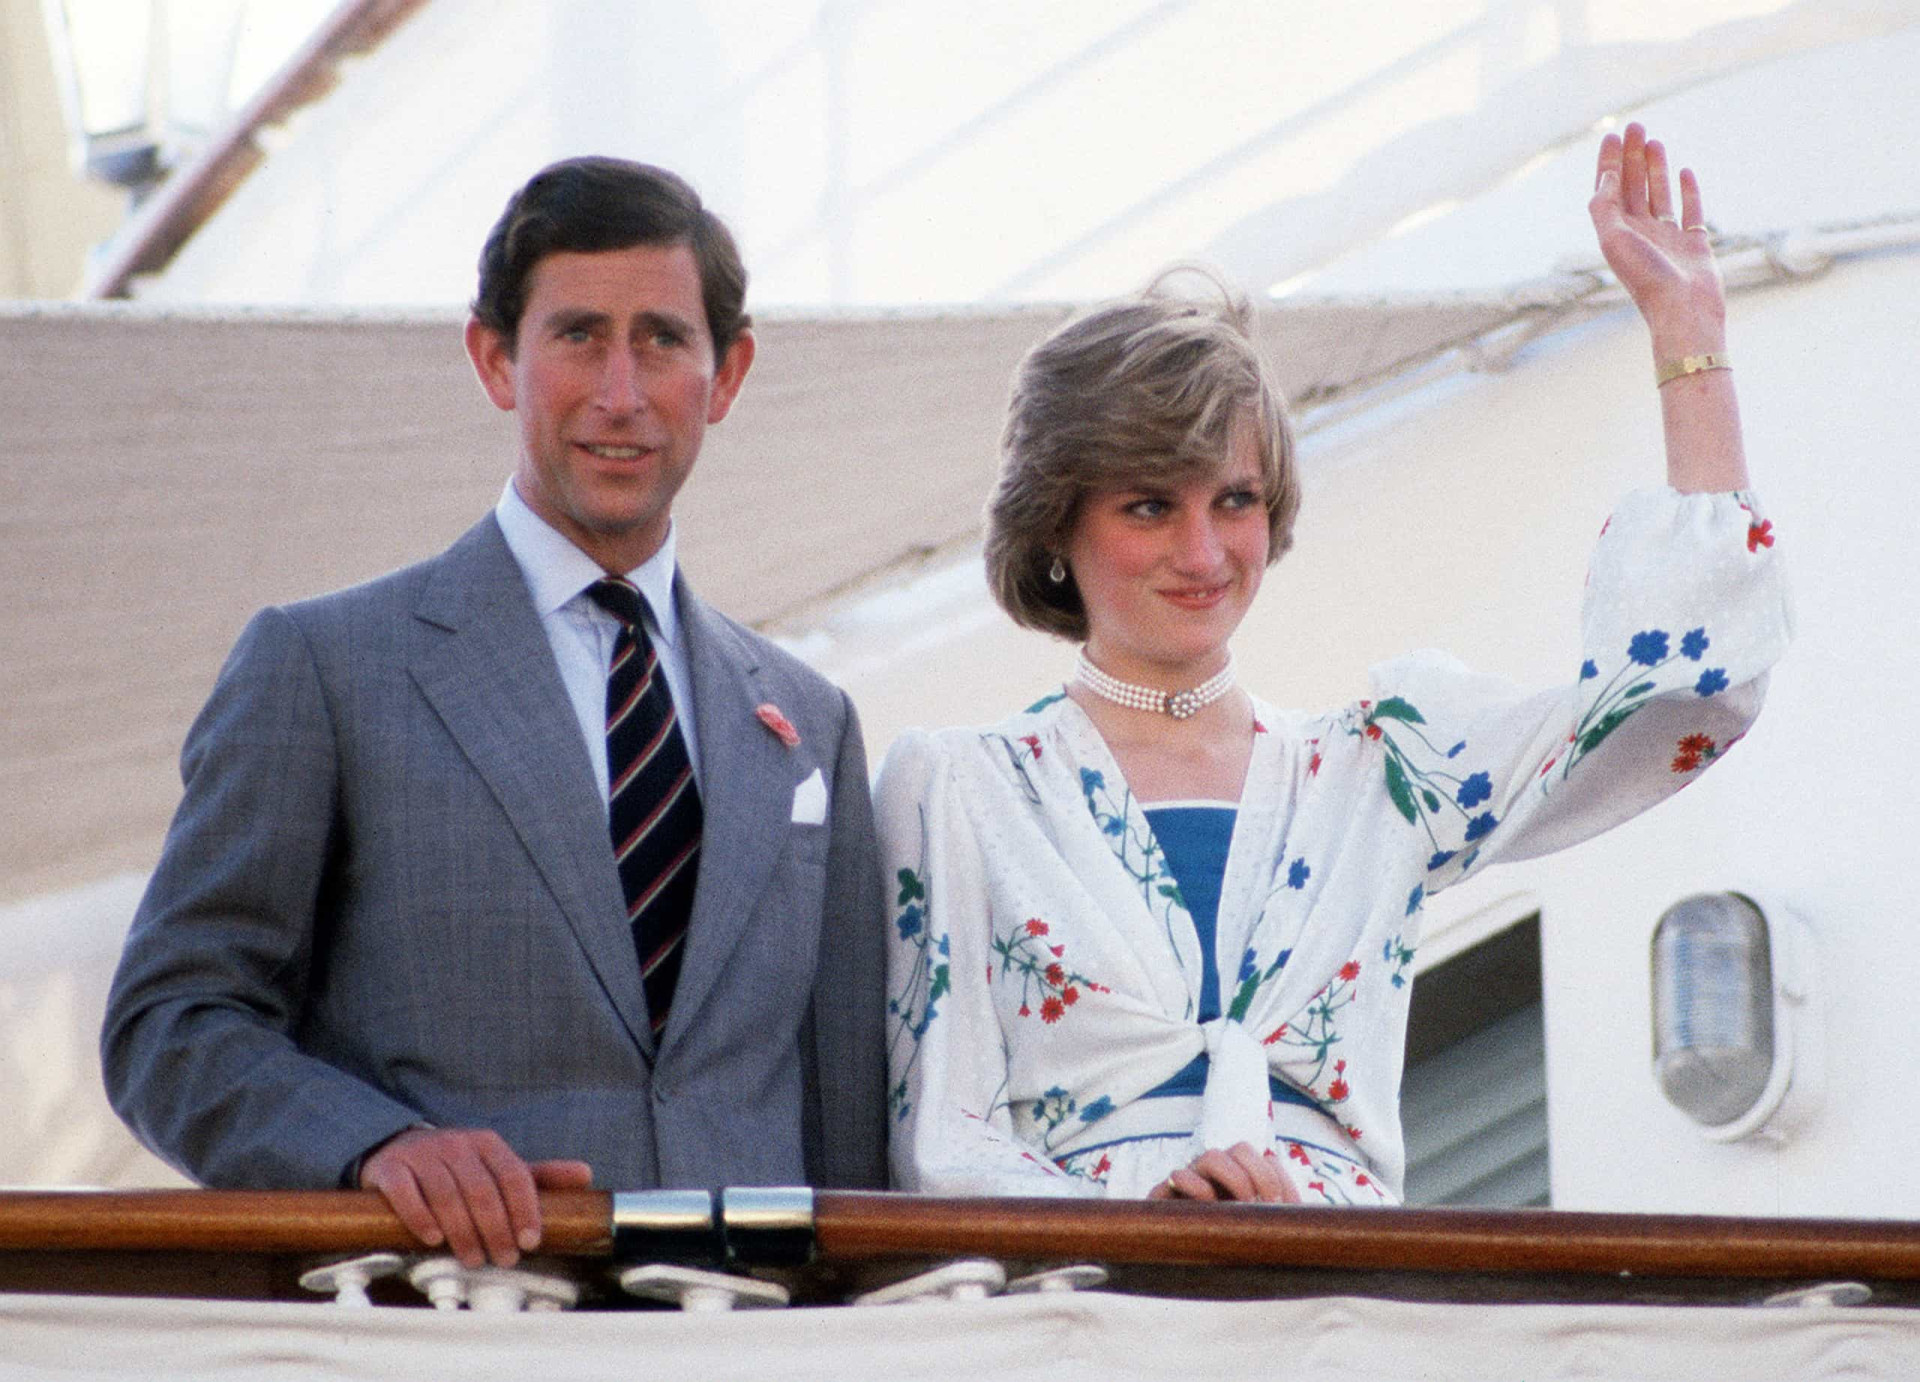 <p>The newly-wedded Prince Charles and <a href="https://www.starsinsider.com/lifestyle/395304/how-princess-dianas-sons-continue-her-legacy-today" rel="noopener">Diana</a>, Princess of Wales leave Gibraltar on <em>Britannia</em> for their honeymoon cruise, which commenced on July 31, 1981.</p><p>You may also like:<a href="https://www.starsinsider.com/n/359032?utm_source=msn.com&utm_medium=display&utm_campaign=referral_description&utm_content=474709v1en-us"> Ces acteurs ont détesté leur personnage à l'écran</a></p>